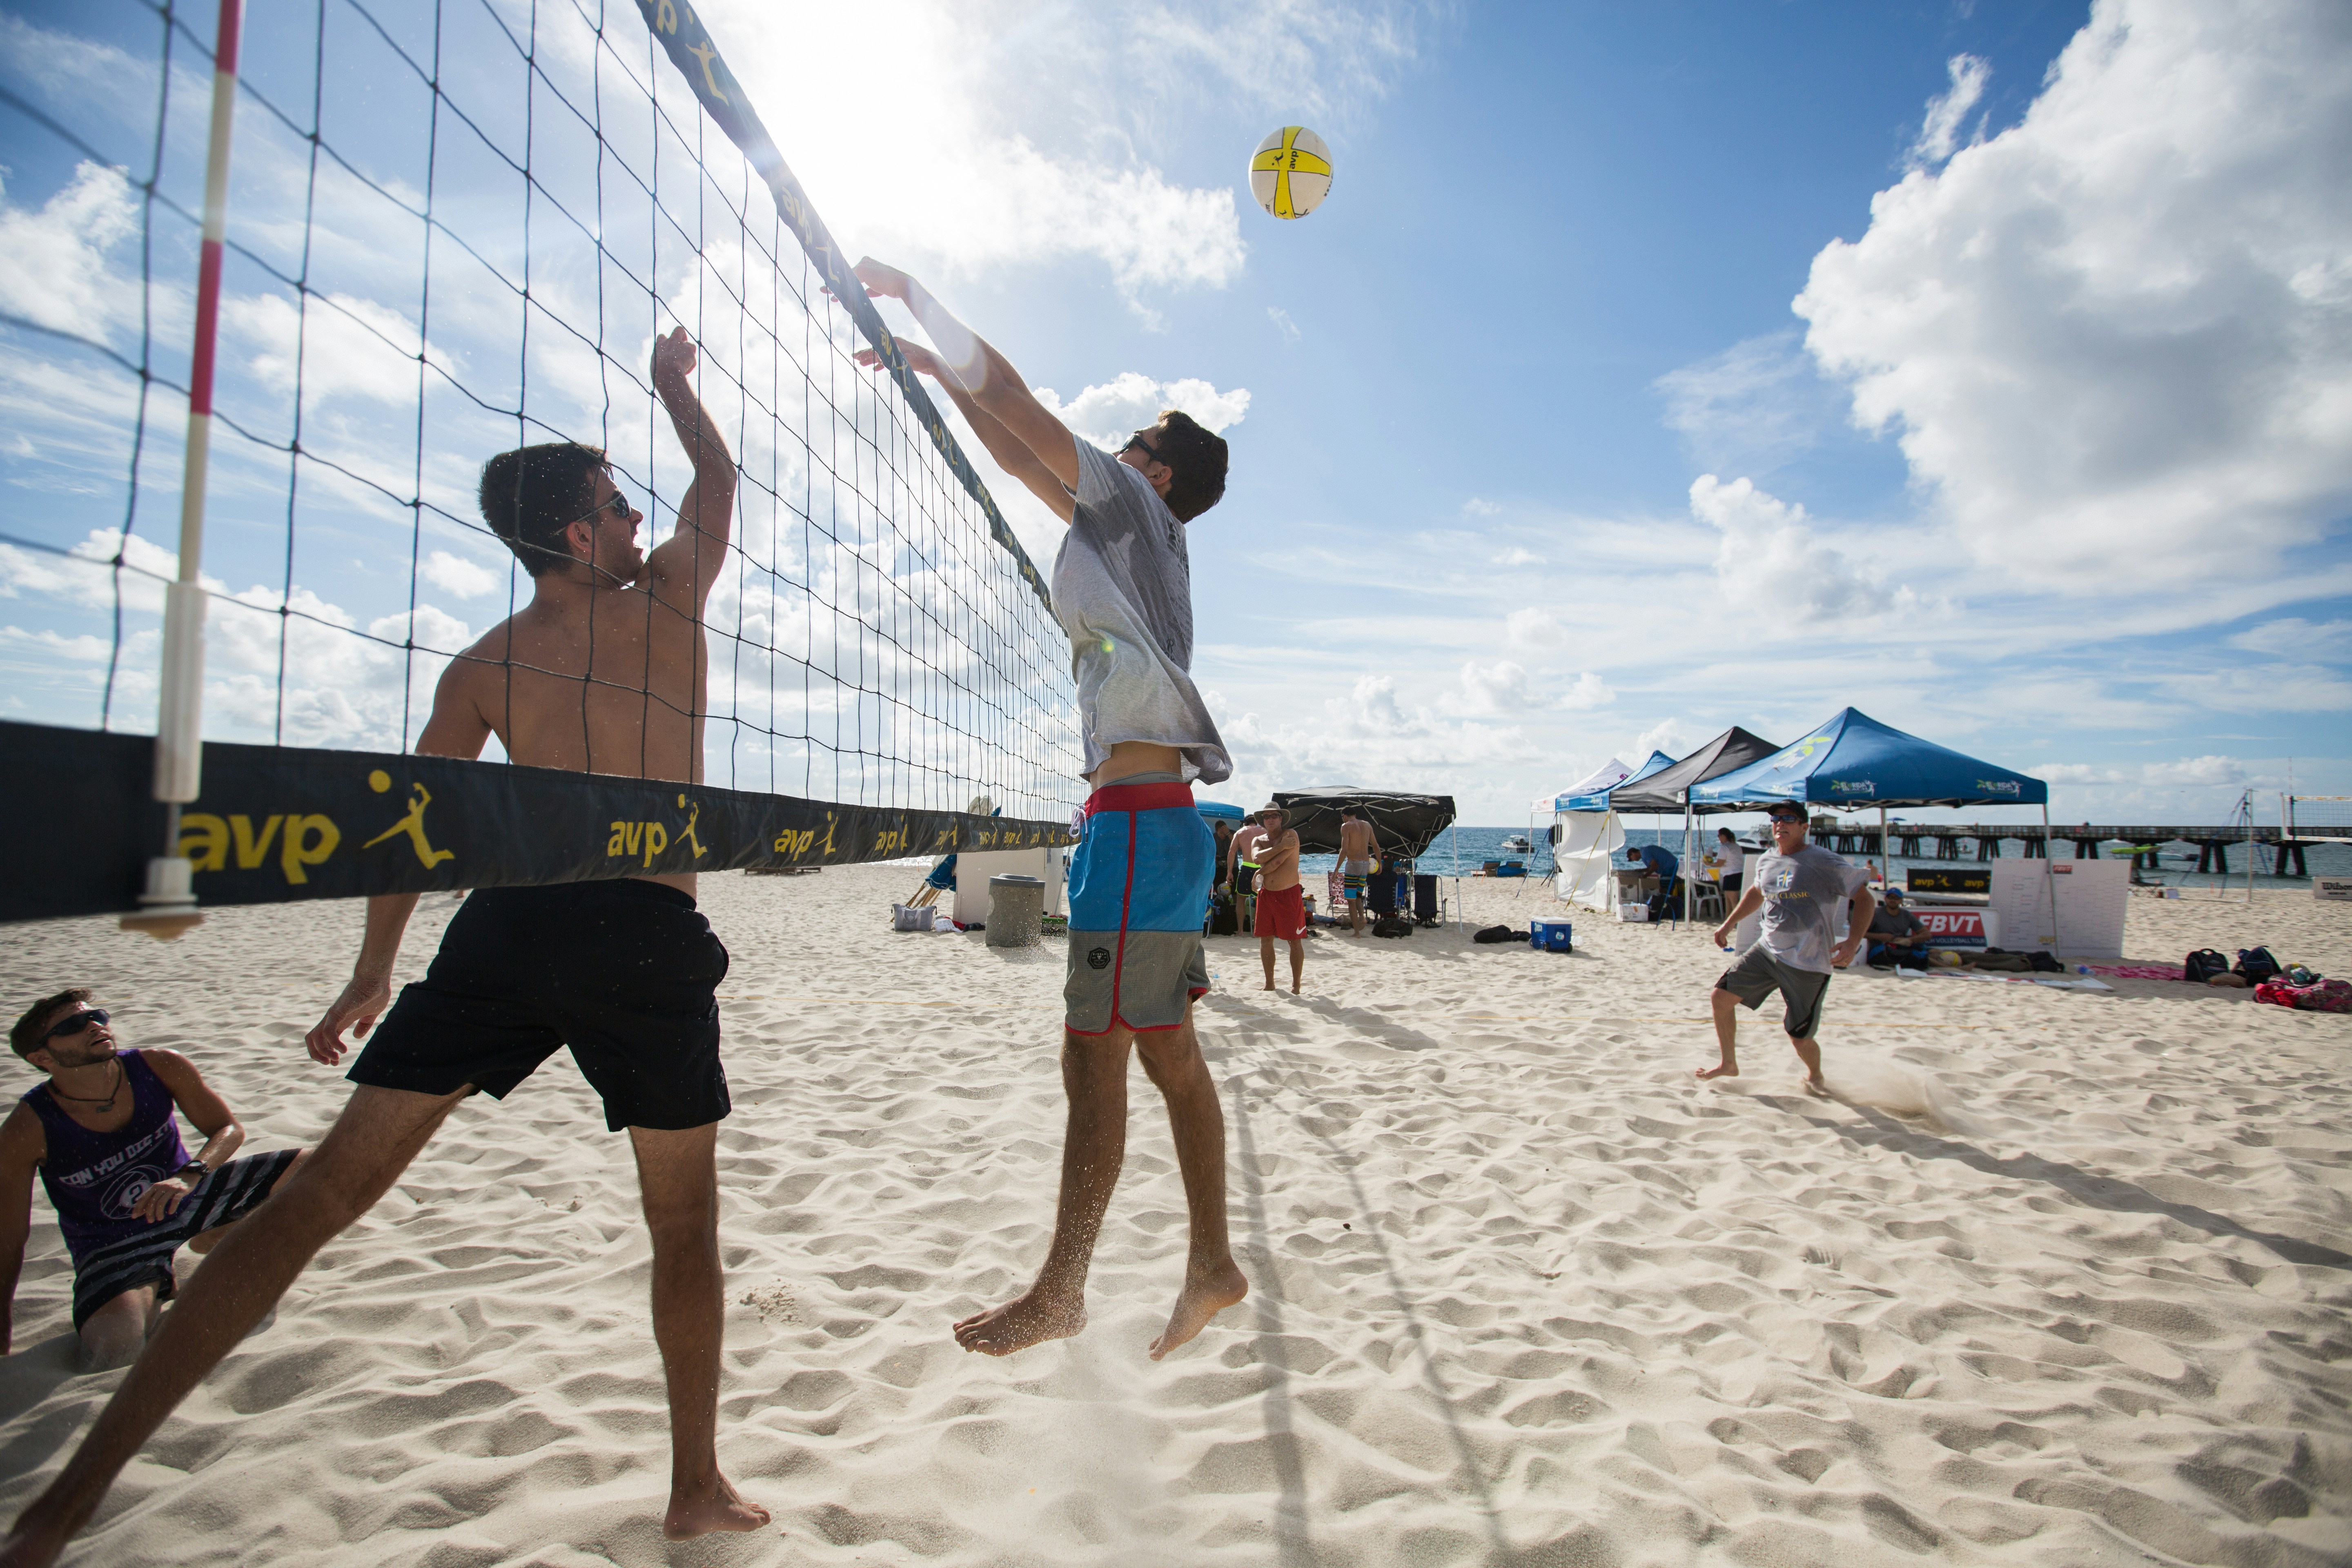 Two teams compete in beach volleyball.